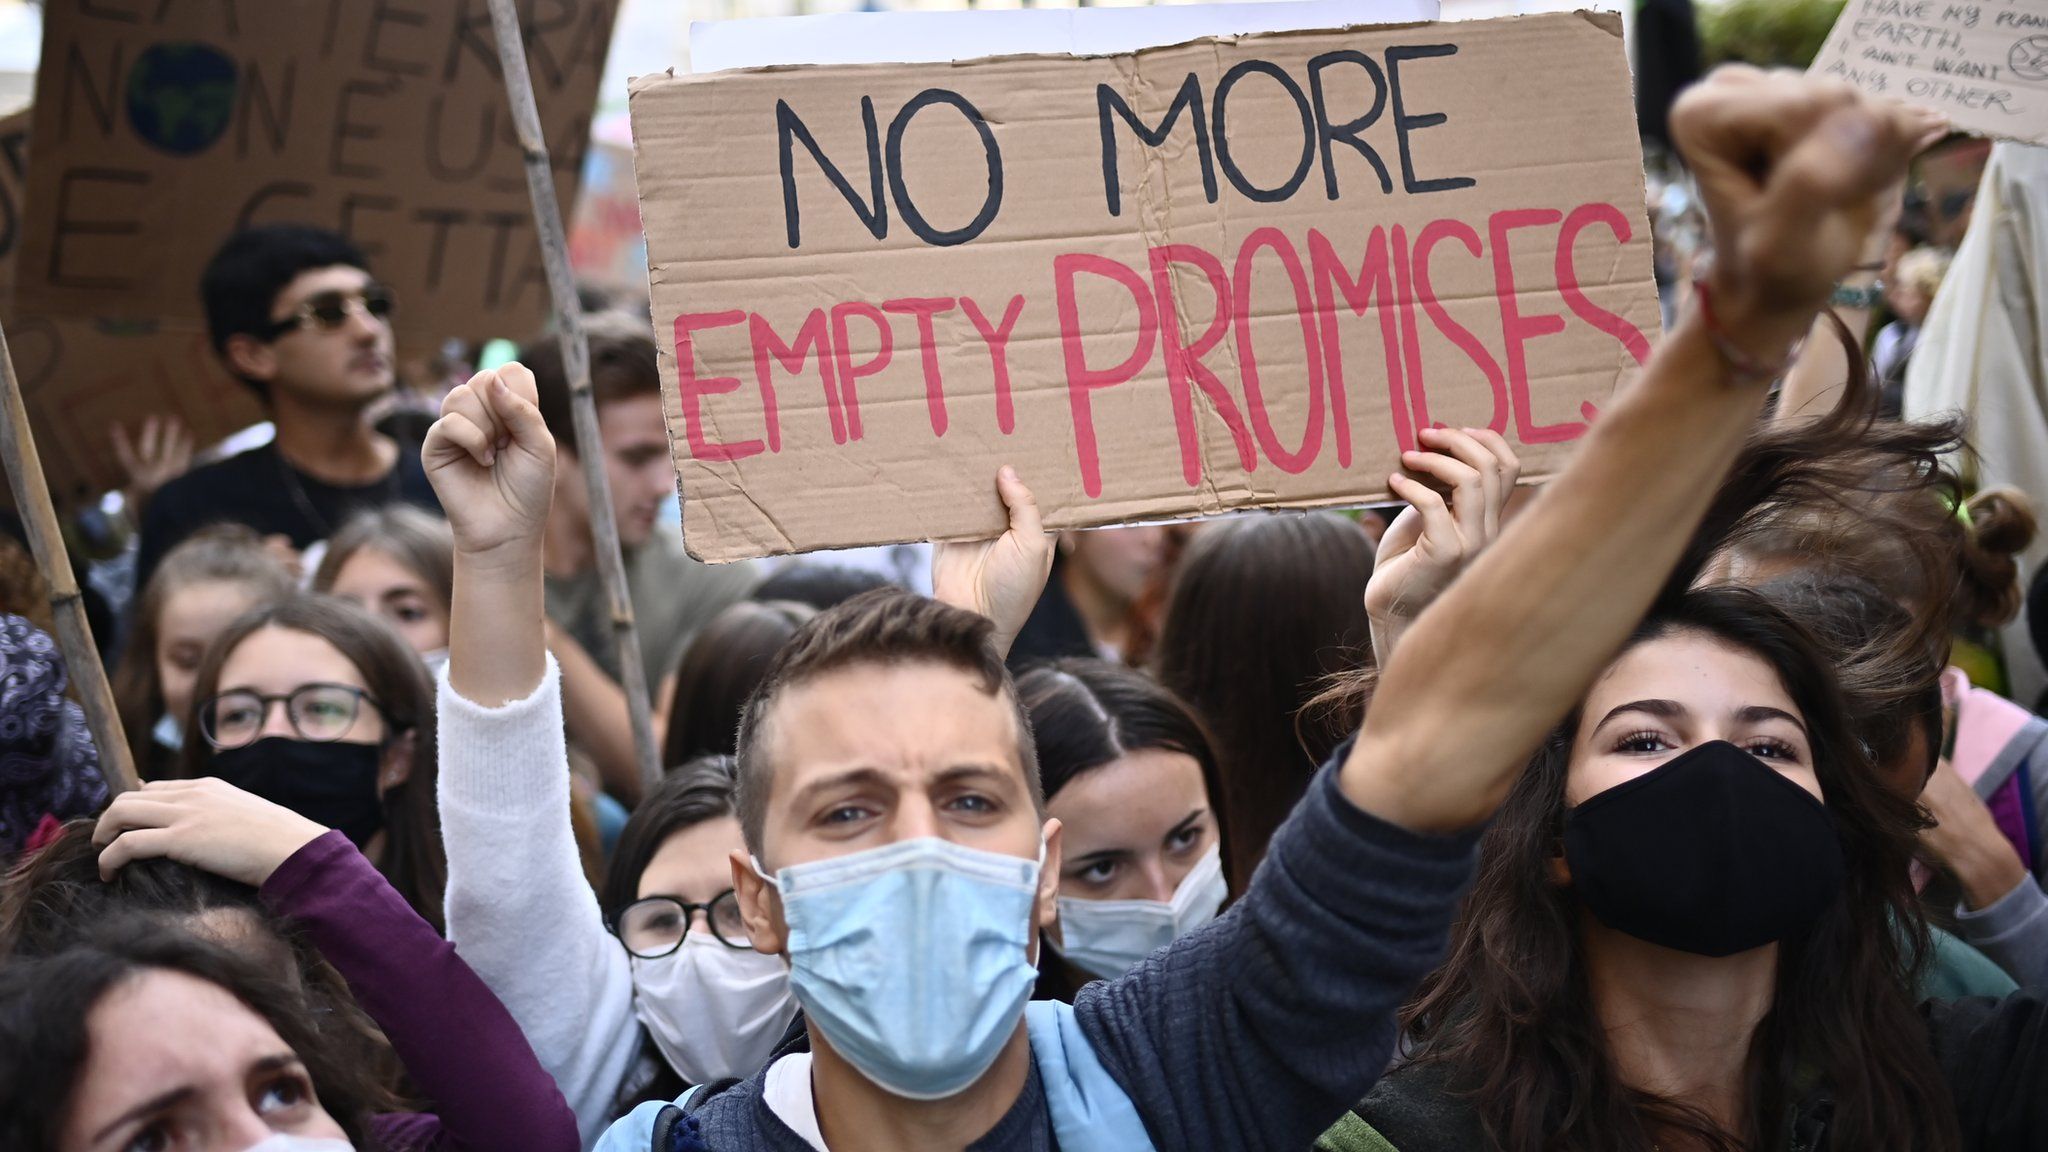 Fridays For Future activists participate in a climate strike march on October 1, 2021 in Milan, Italy